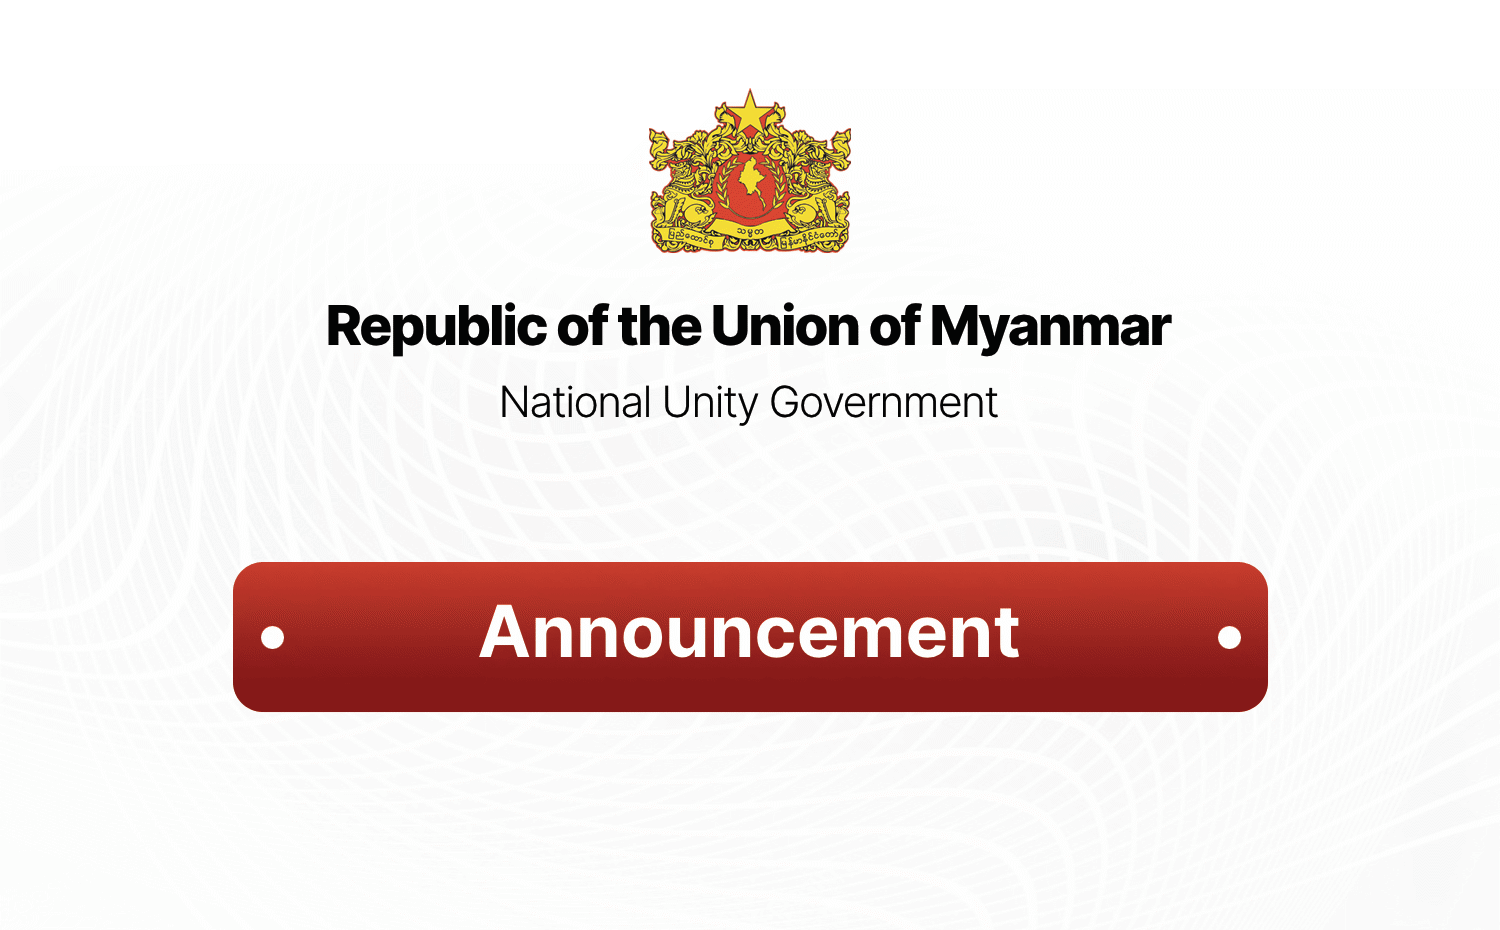 Announcement (2/2022) – Myanmar withdraws all preliminary objections to the International Court of Justice hearing on the genocide case